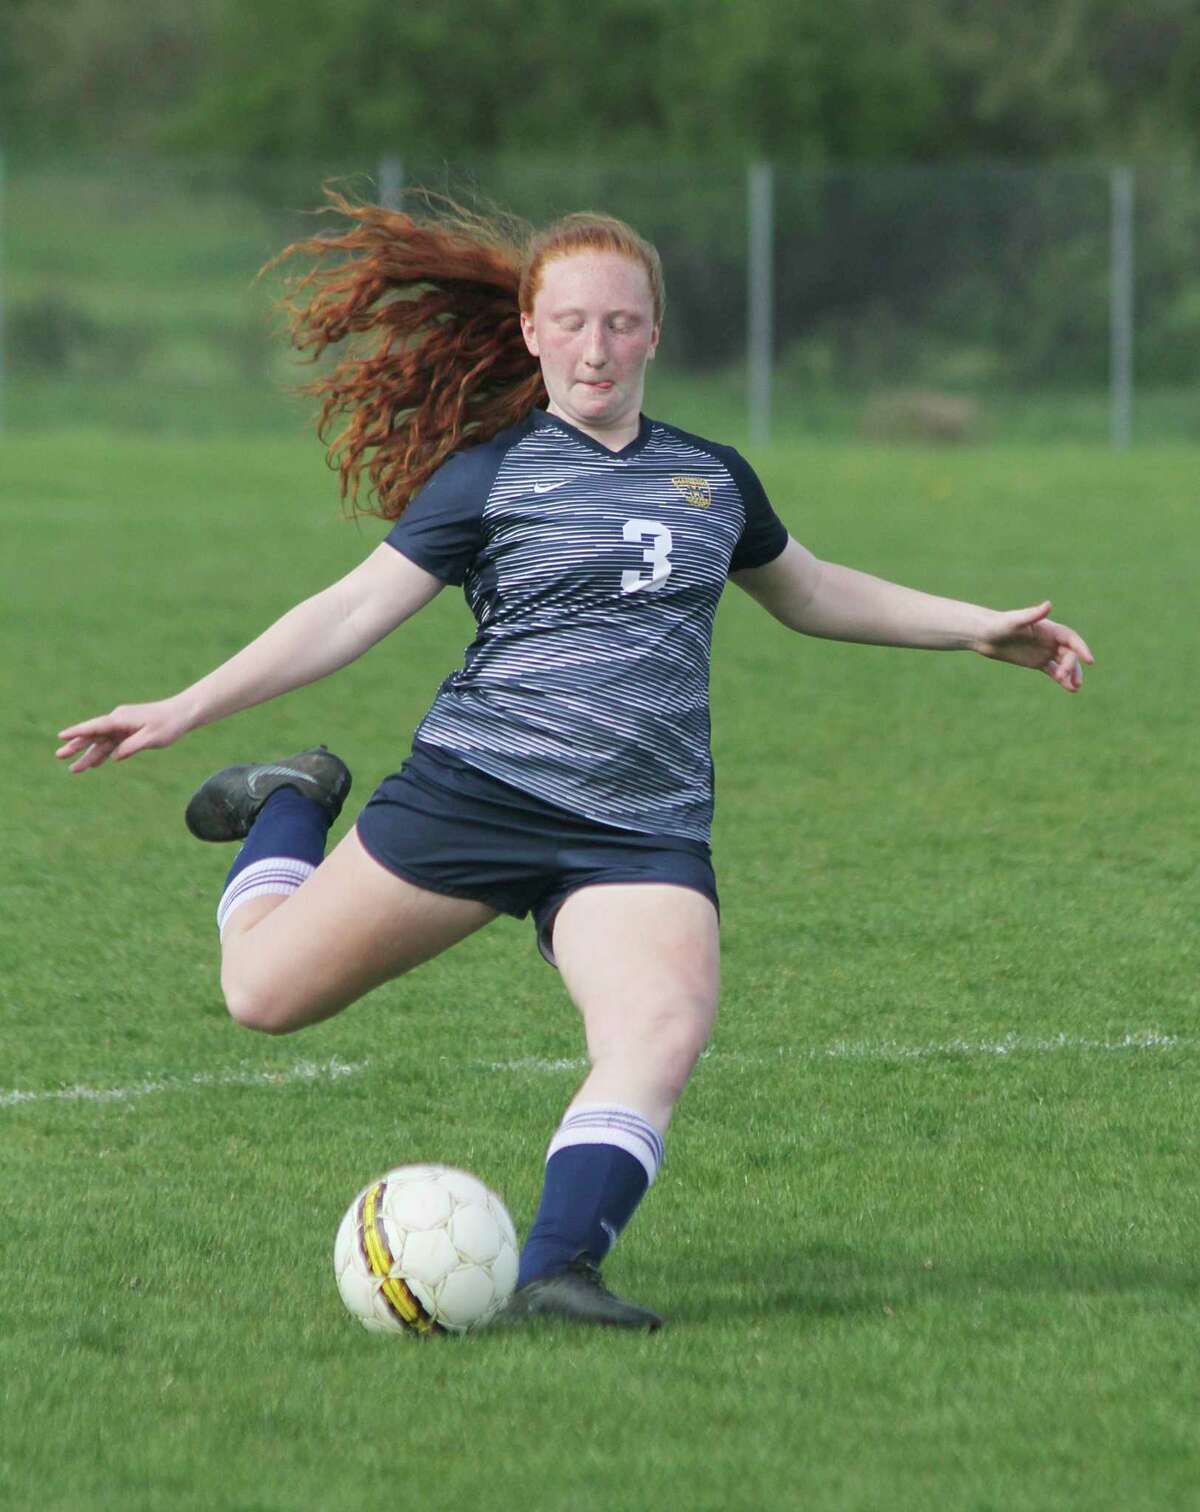 Manistee's Alora Sundbeck was an all-conference selection as a sophomore last season. (News Advocate file photo)